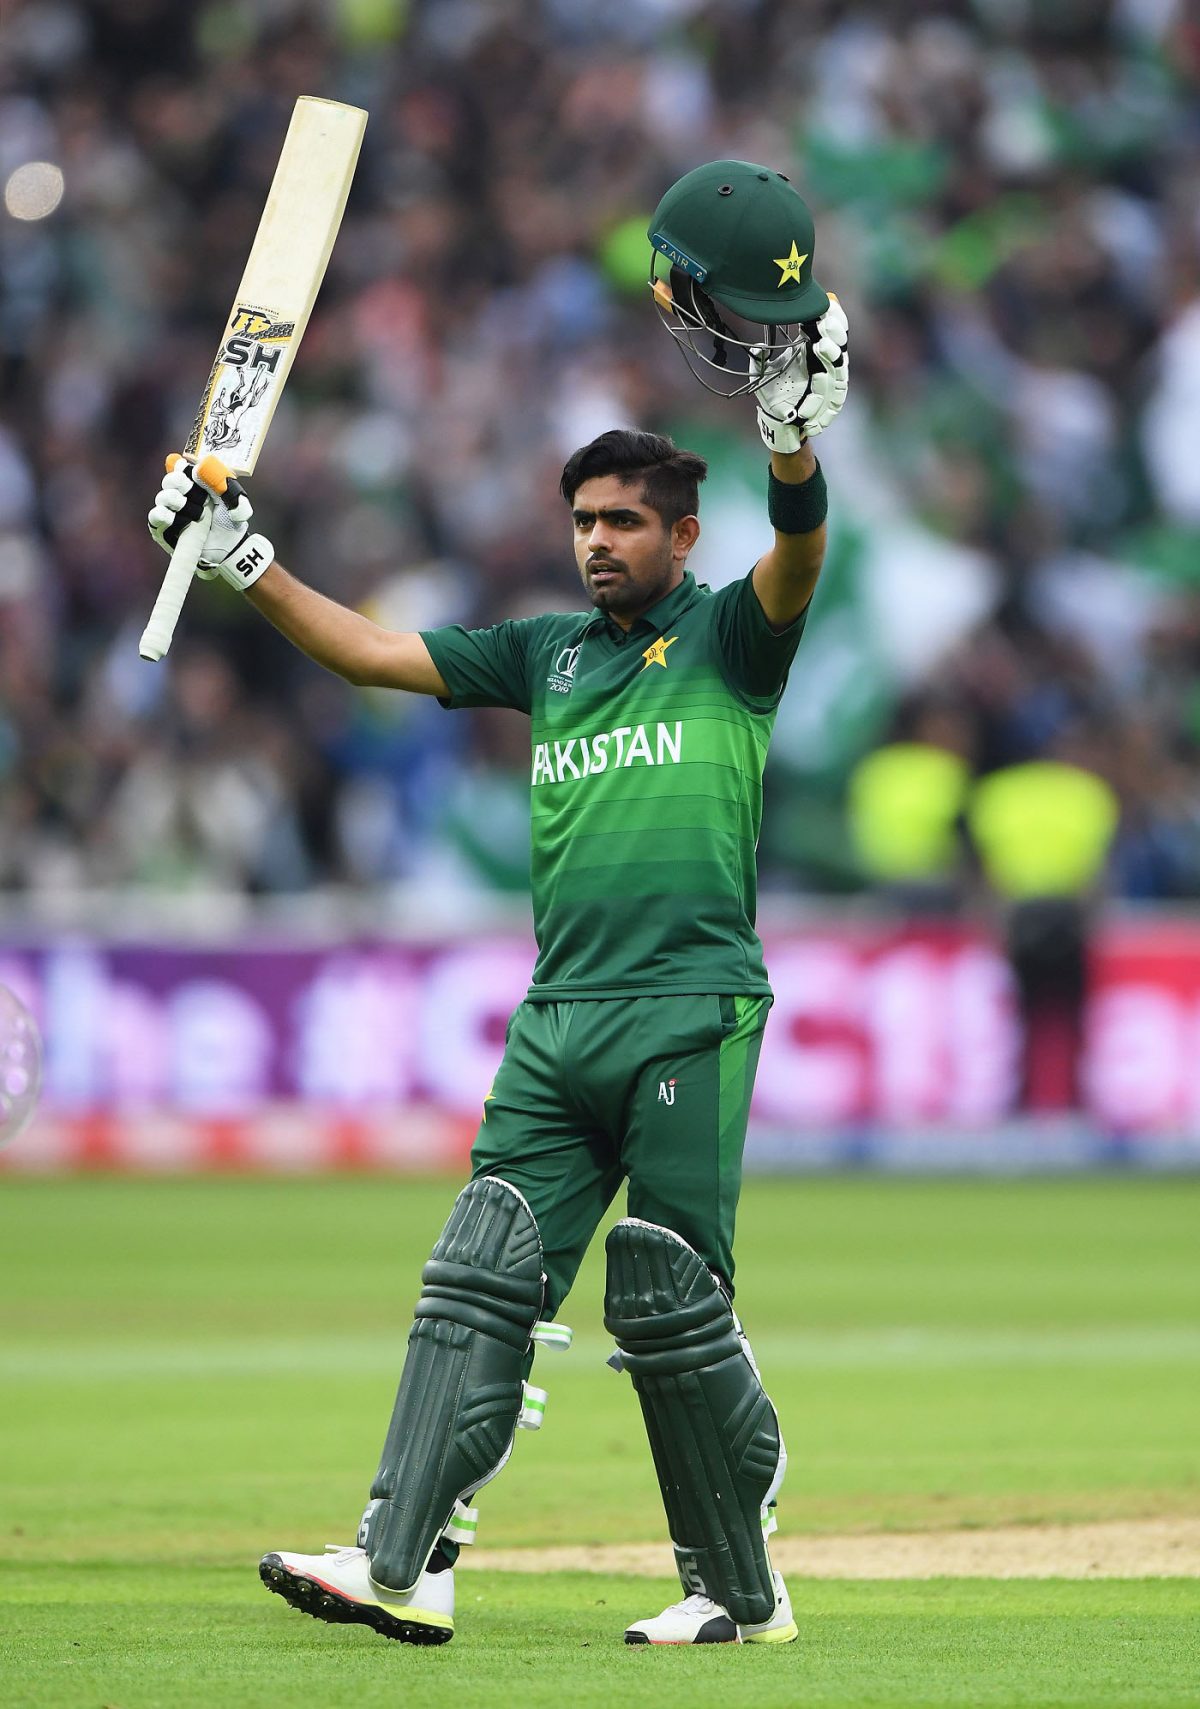 BIRMINGHAM, ENGLAND – JUNE 26: Babar Azam of Pakistan celebrates after scoring a century during the Group Stage match of the ICC Cricket World Cup 2019 between New Zealand and Pakistan at Edgbaston on June 26, 2019 in Birmingham, England. (Photo by Stu Forster-IDI/IDI via Getty Images)